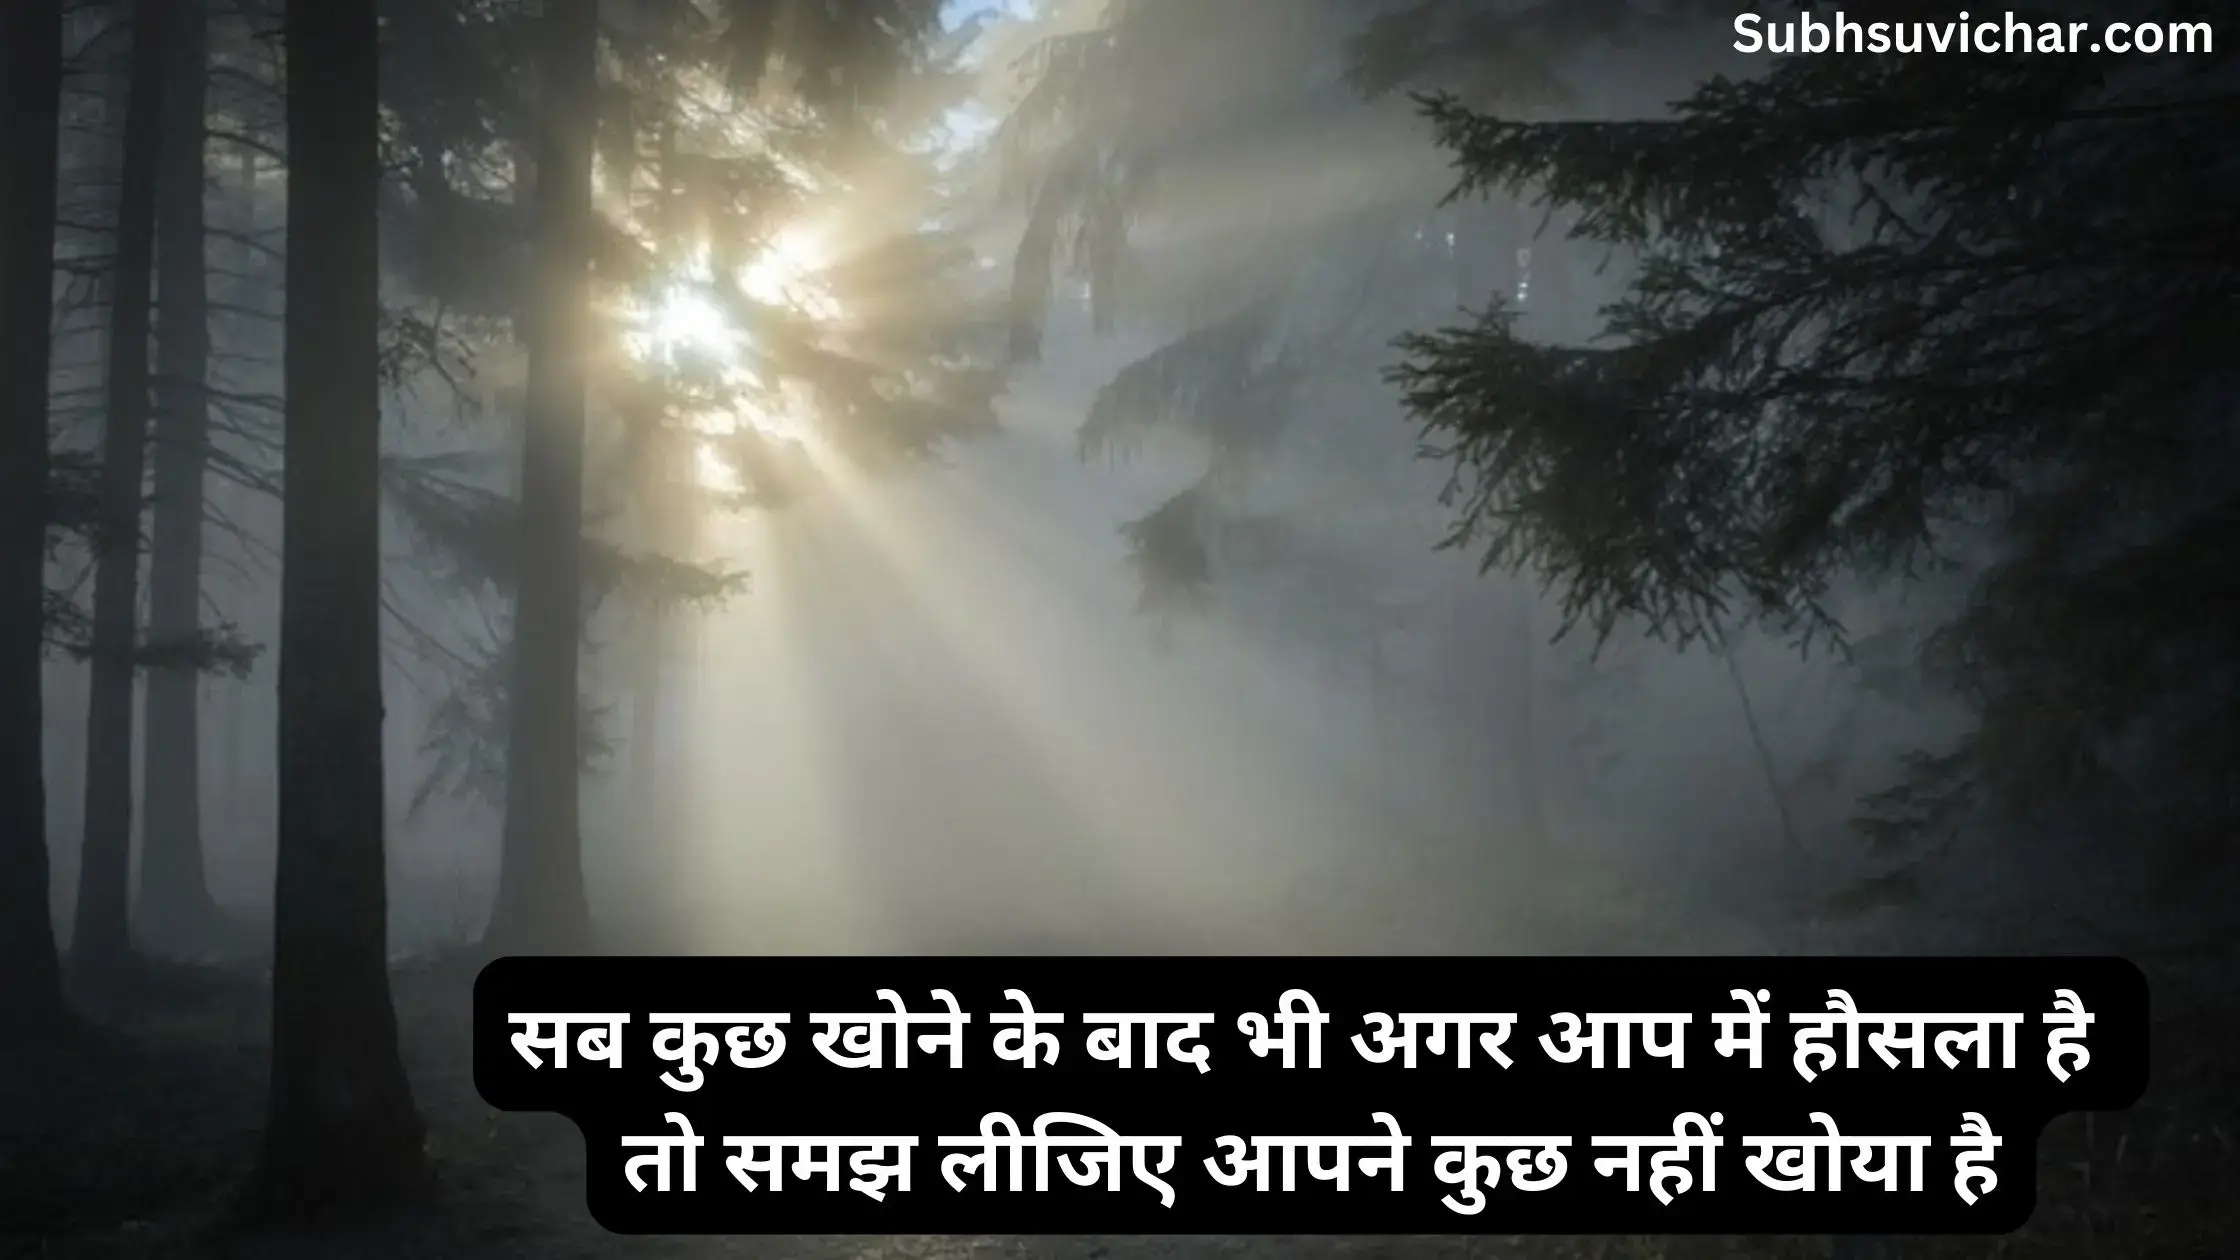 This post contains huge collection of anmol vachan suvichar in hindi font with images for your whatsaap and facebook status.